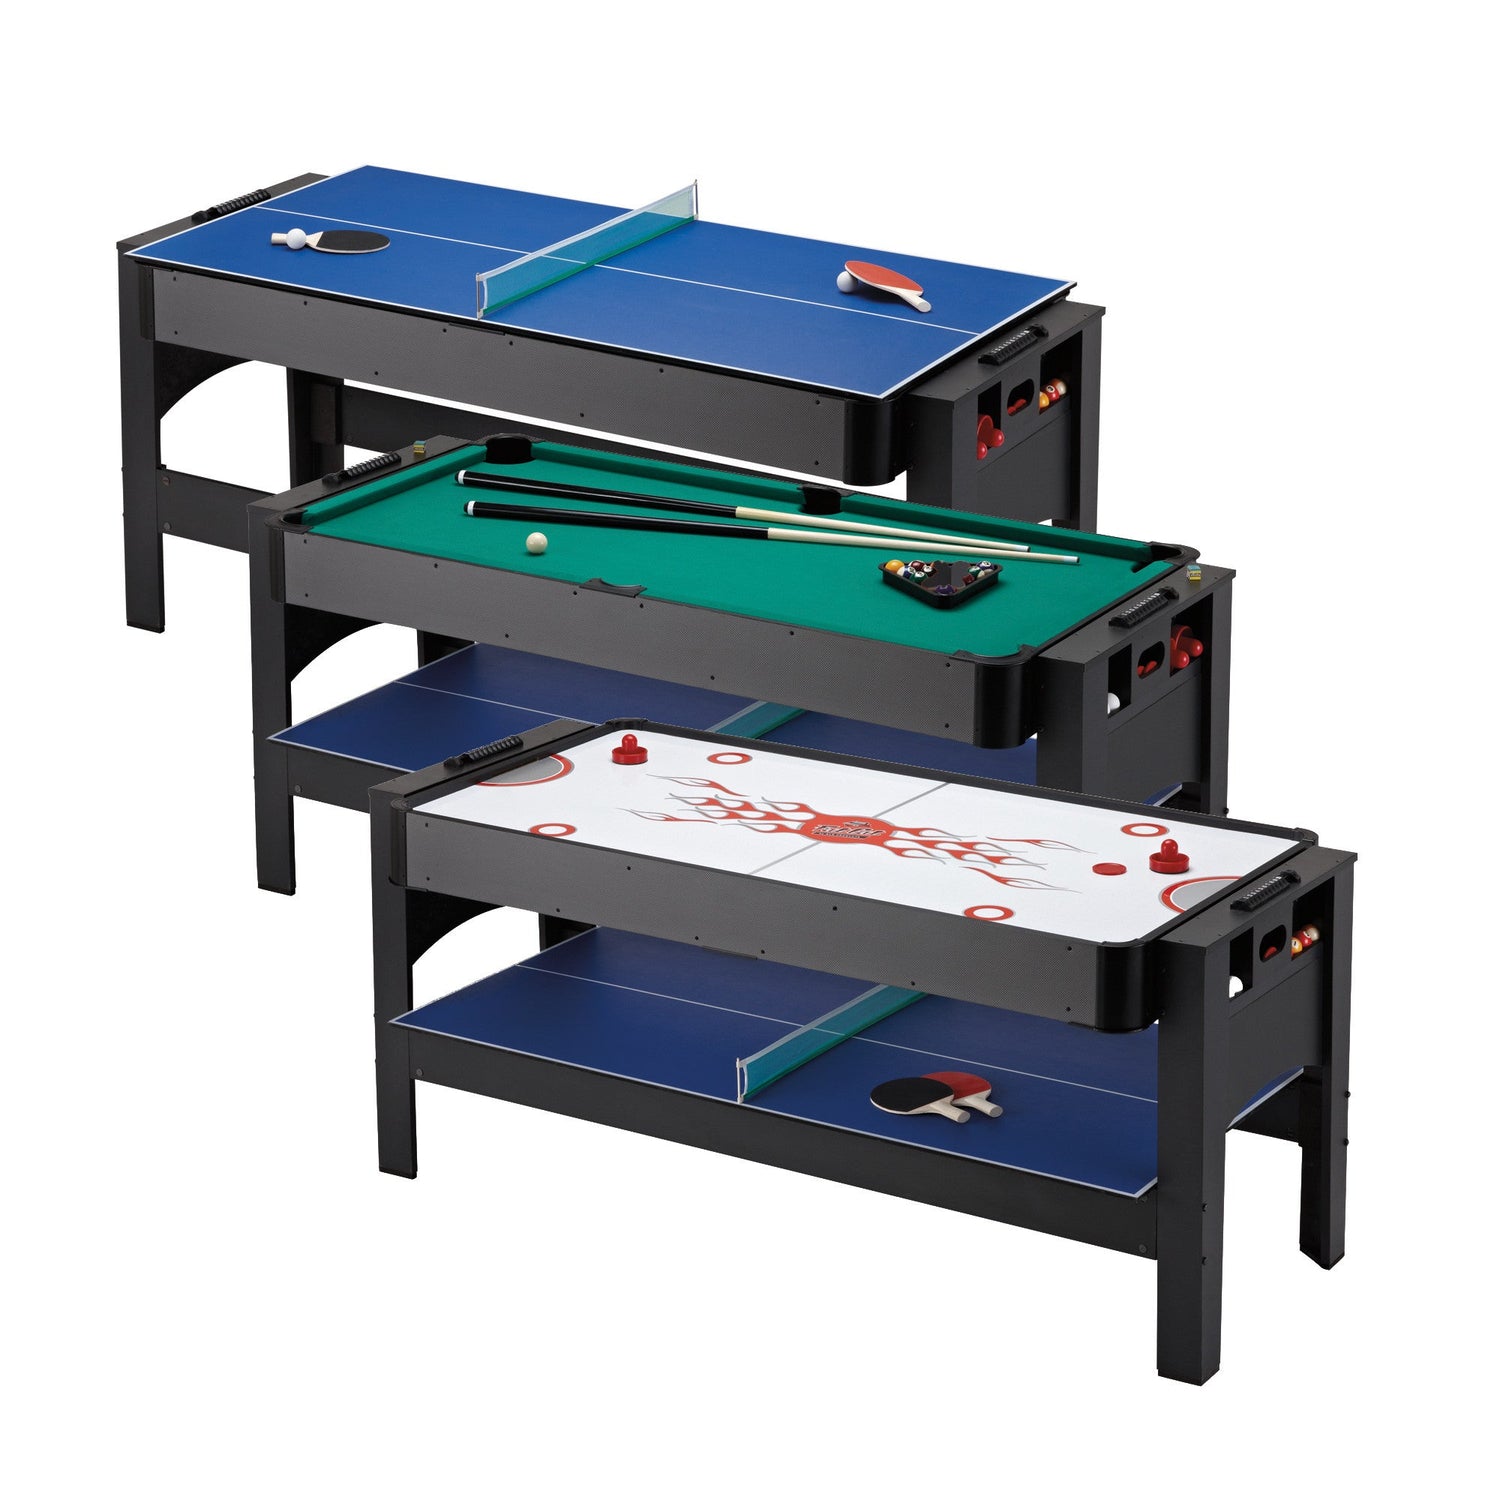 6FT POOL TABLES